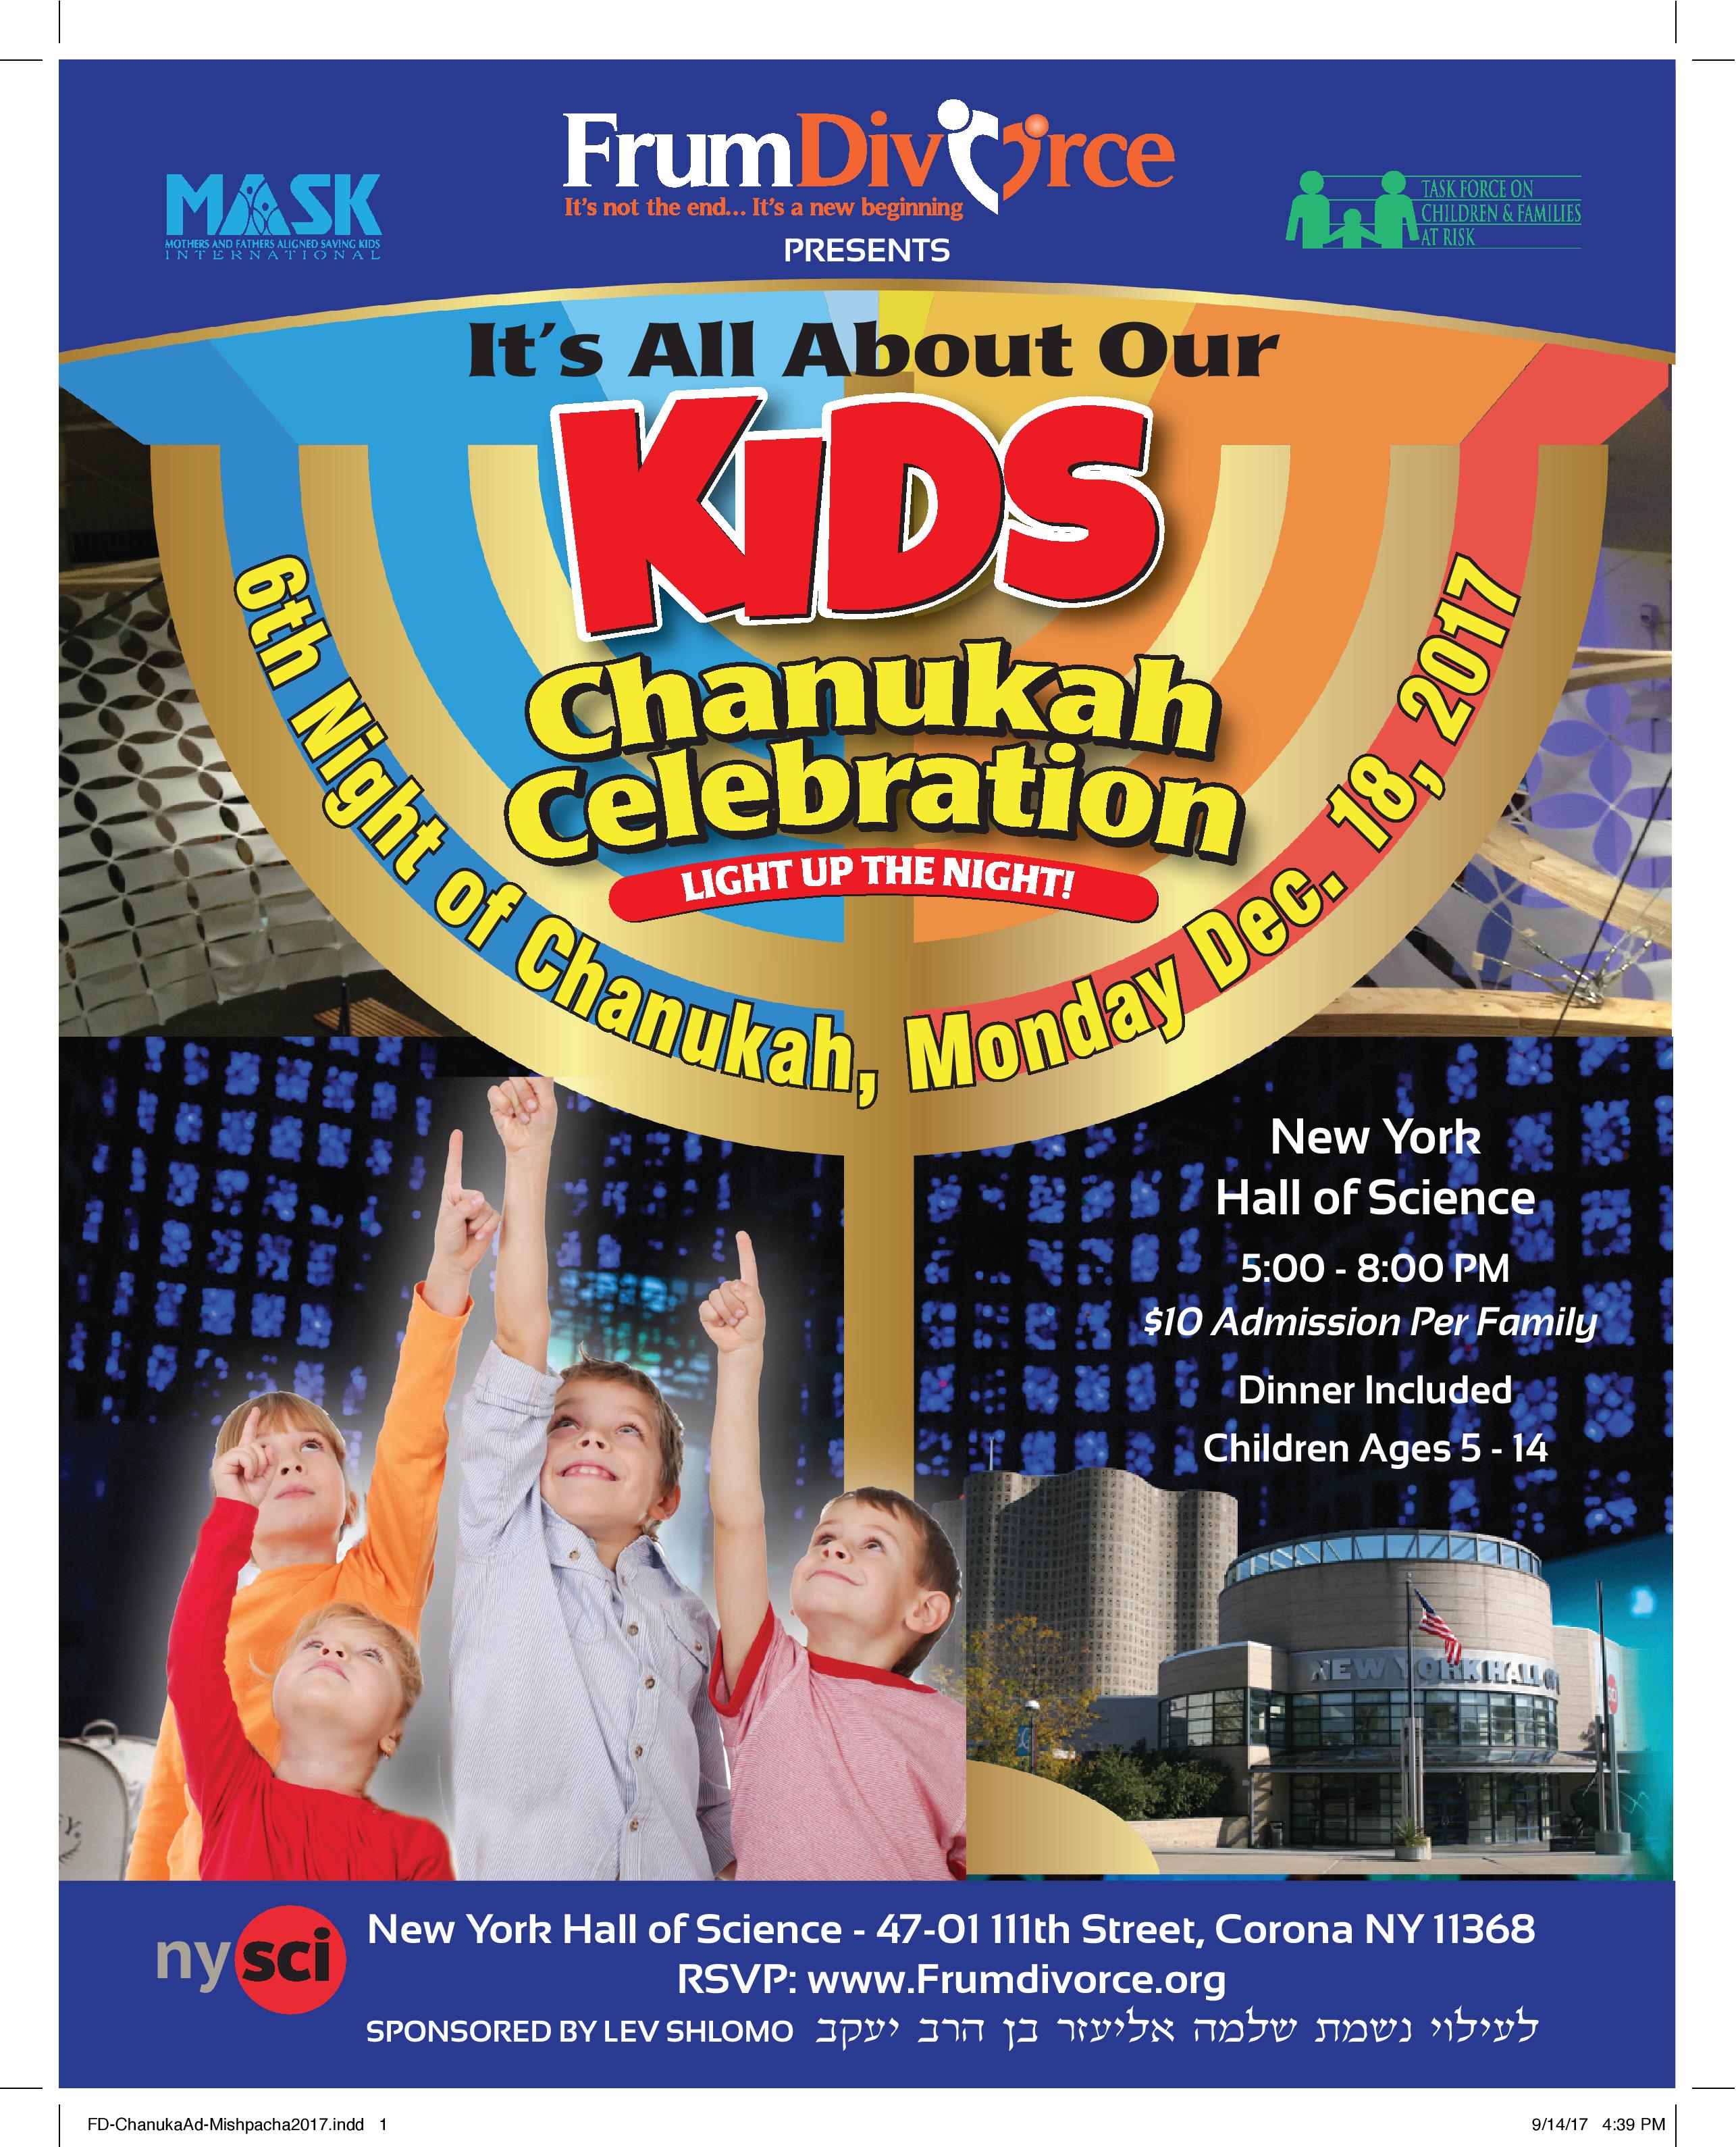 4th Annual Chanukah Celebration - SOLD OUT